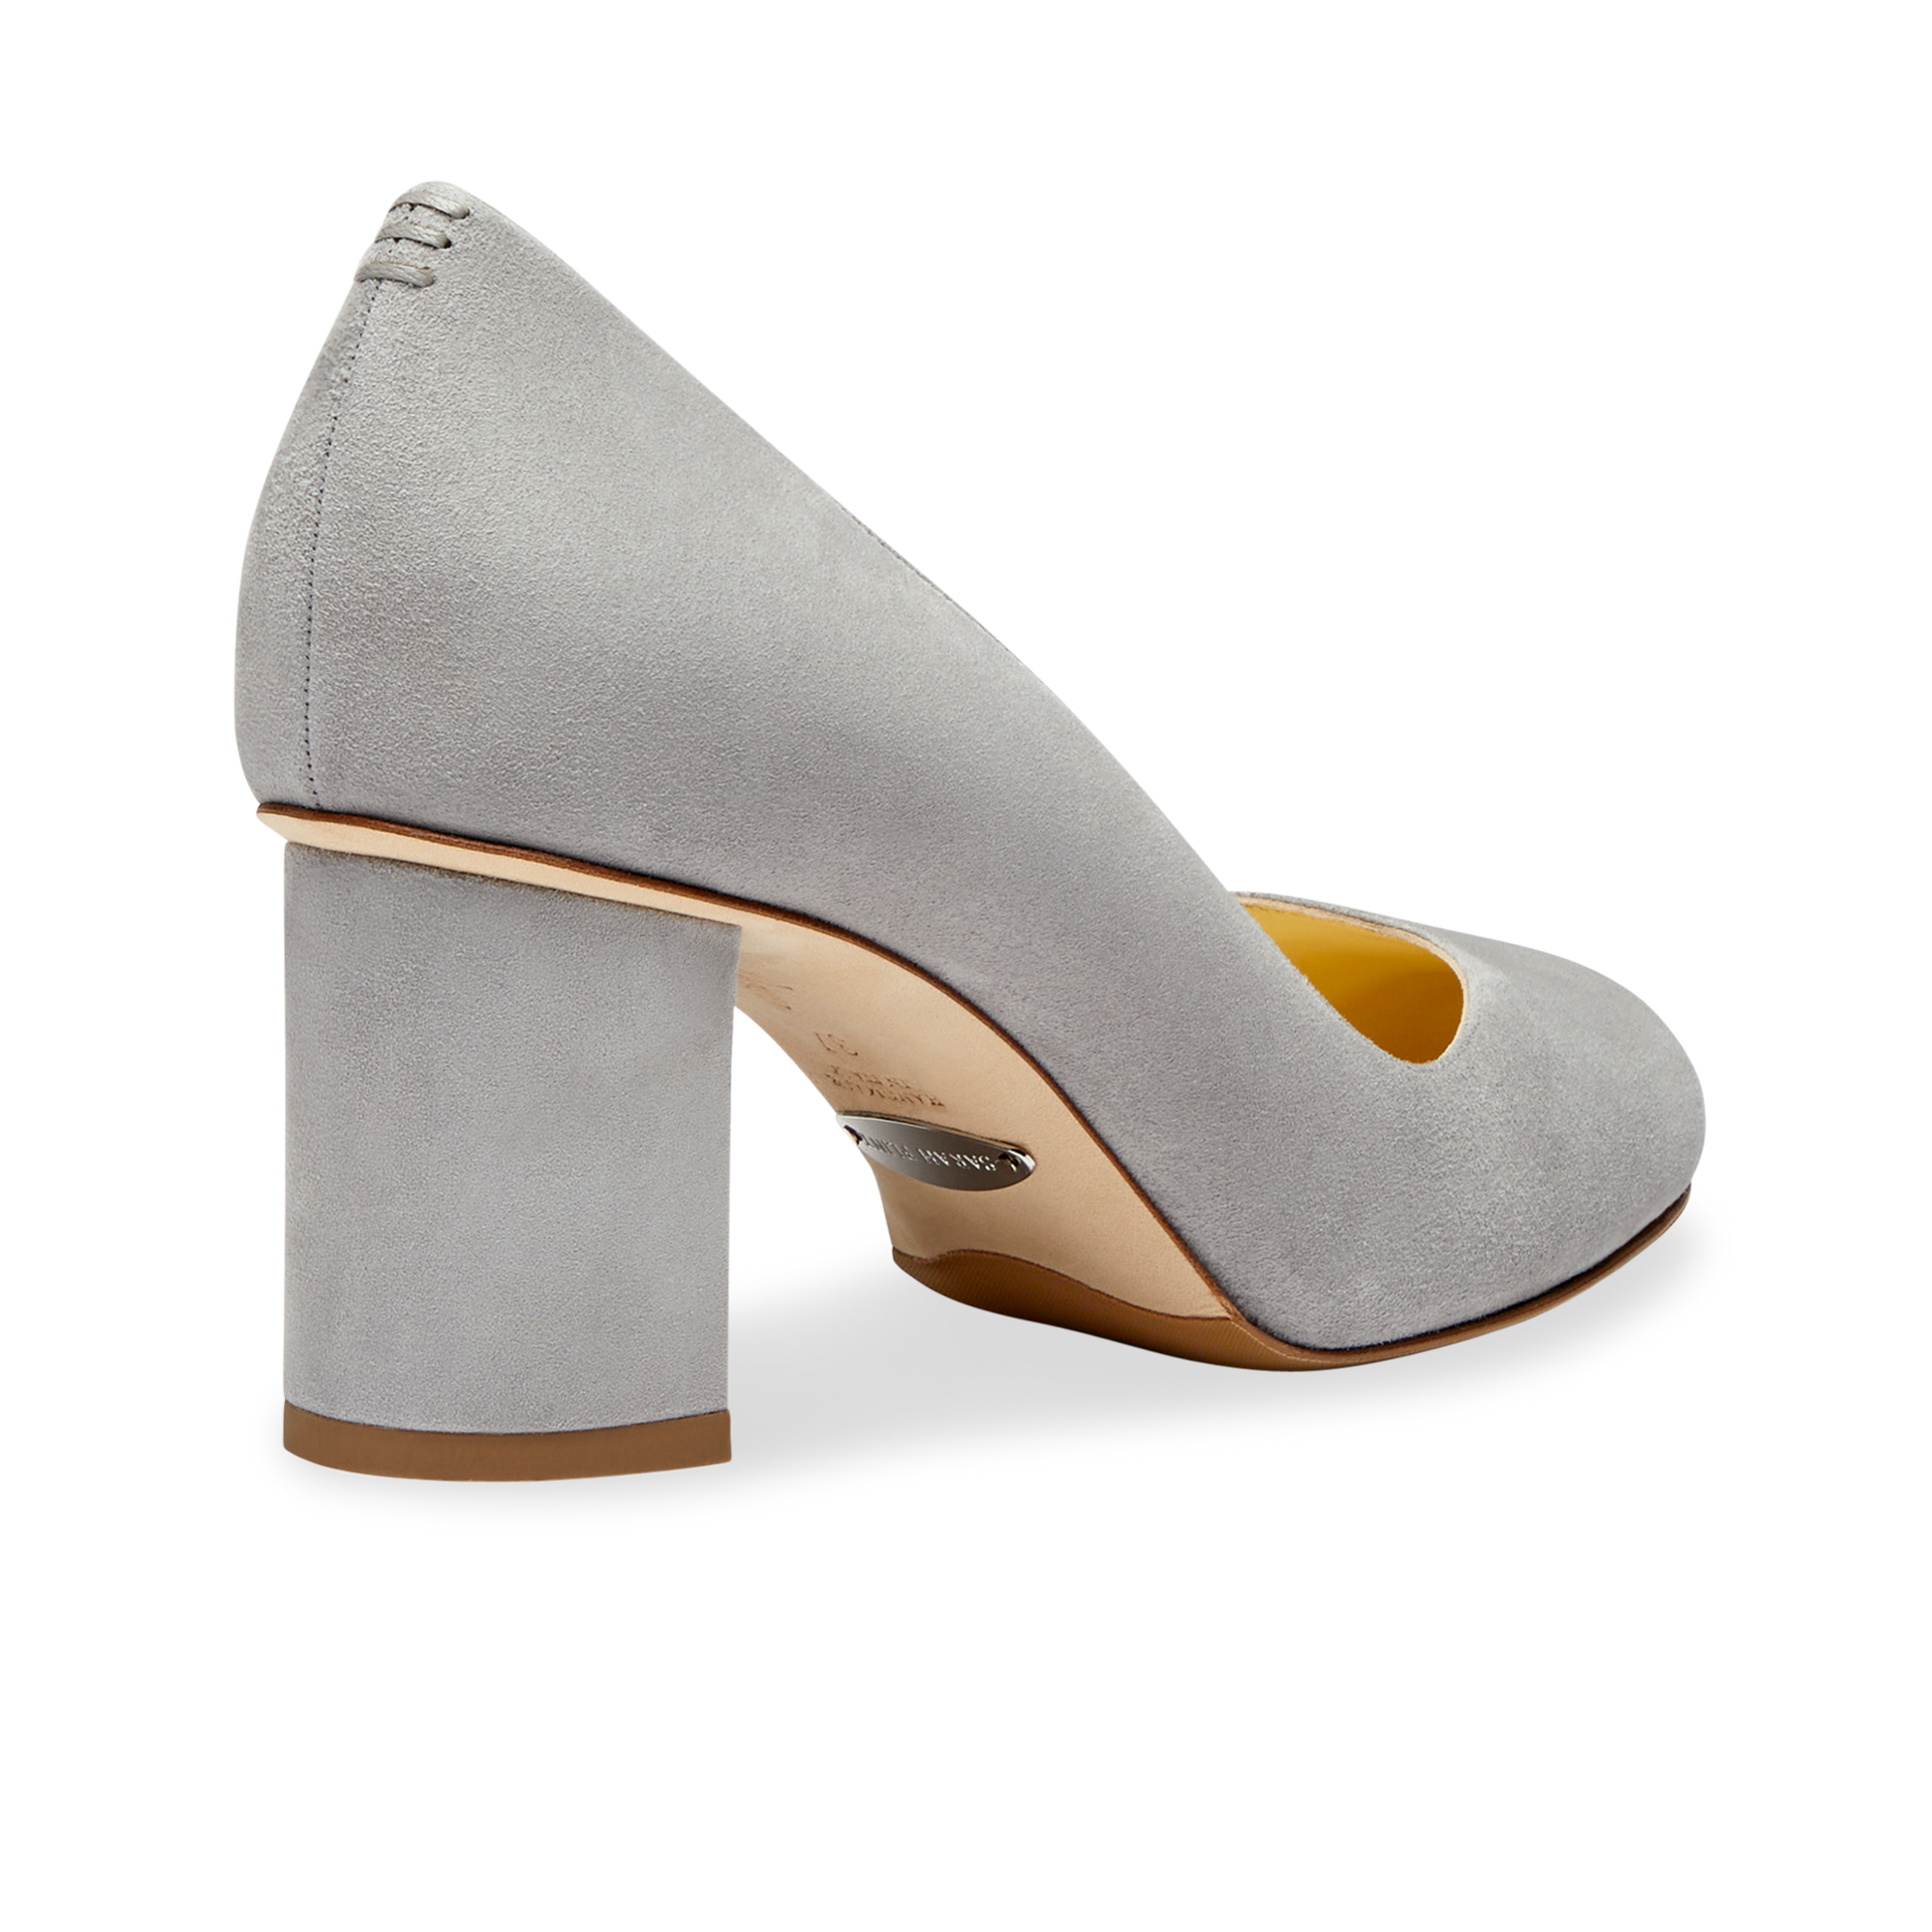 Perfect Round Toe Pump in Light Gray Suede Handcrafted in Italy